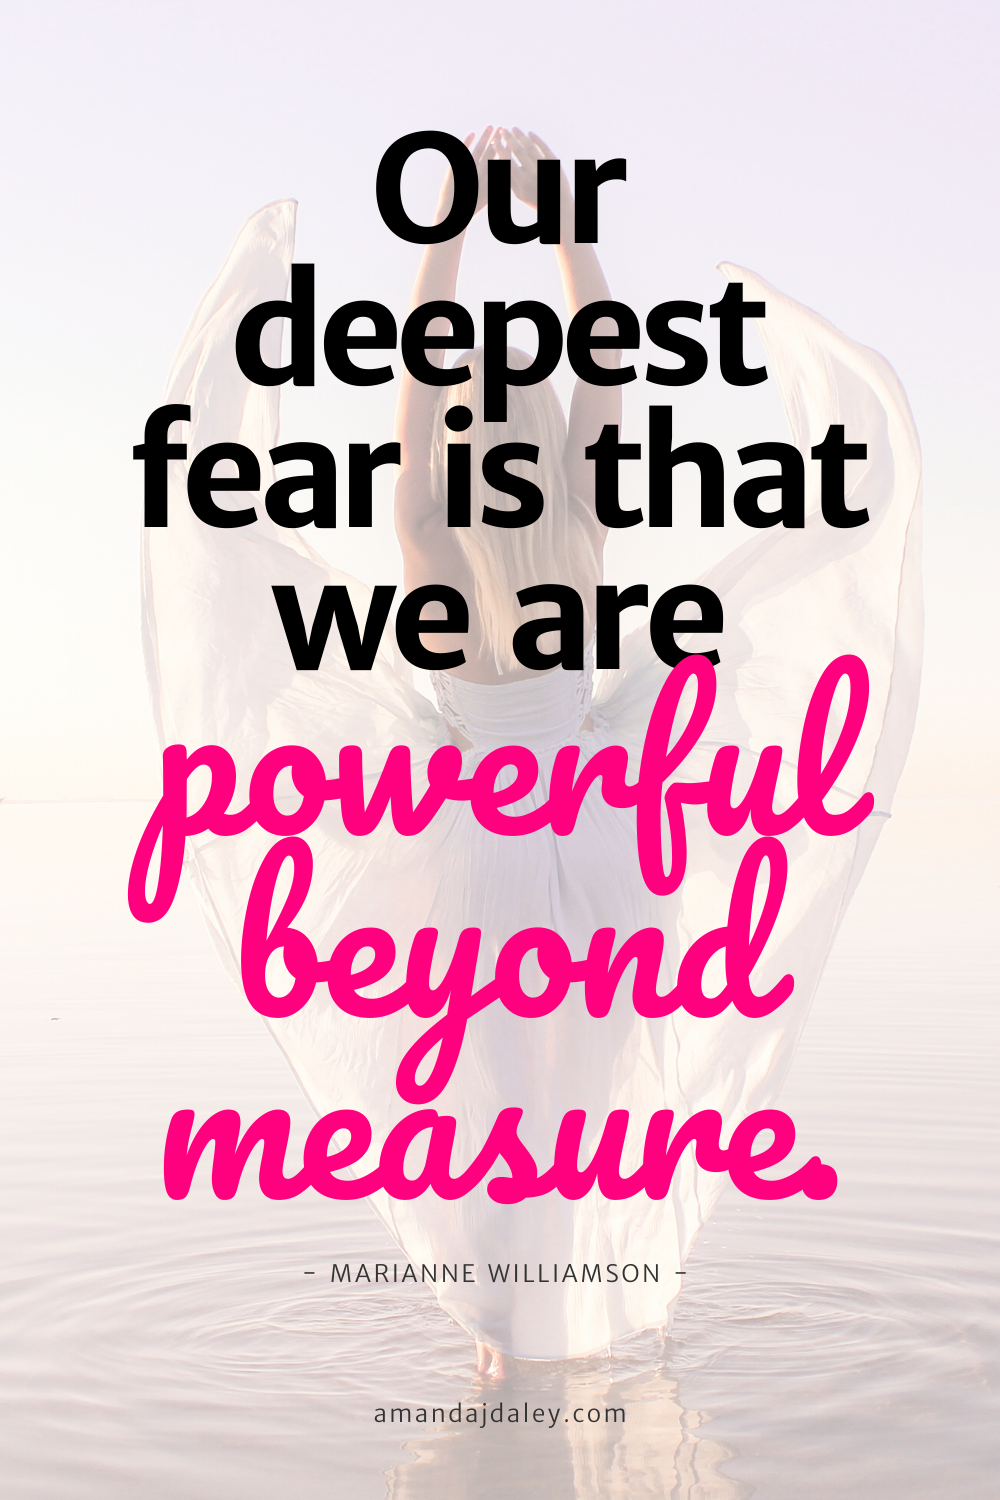 Motivational quote for female entrepreneurs - powerful beyond measure - Marianne Williamson.png